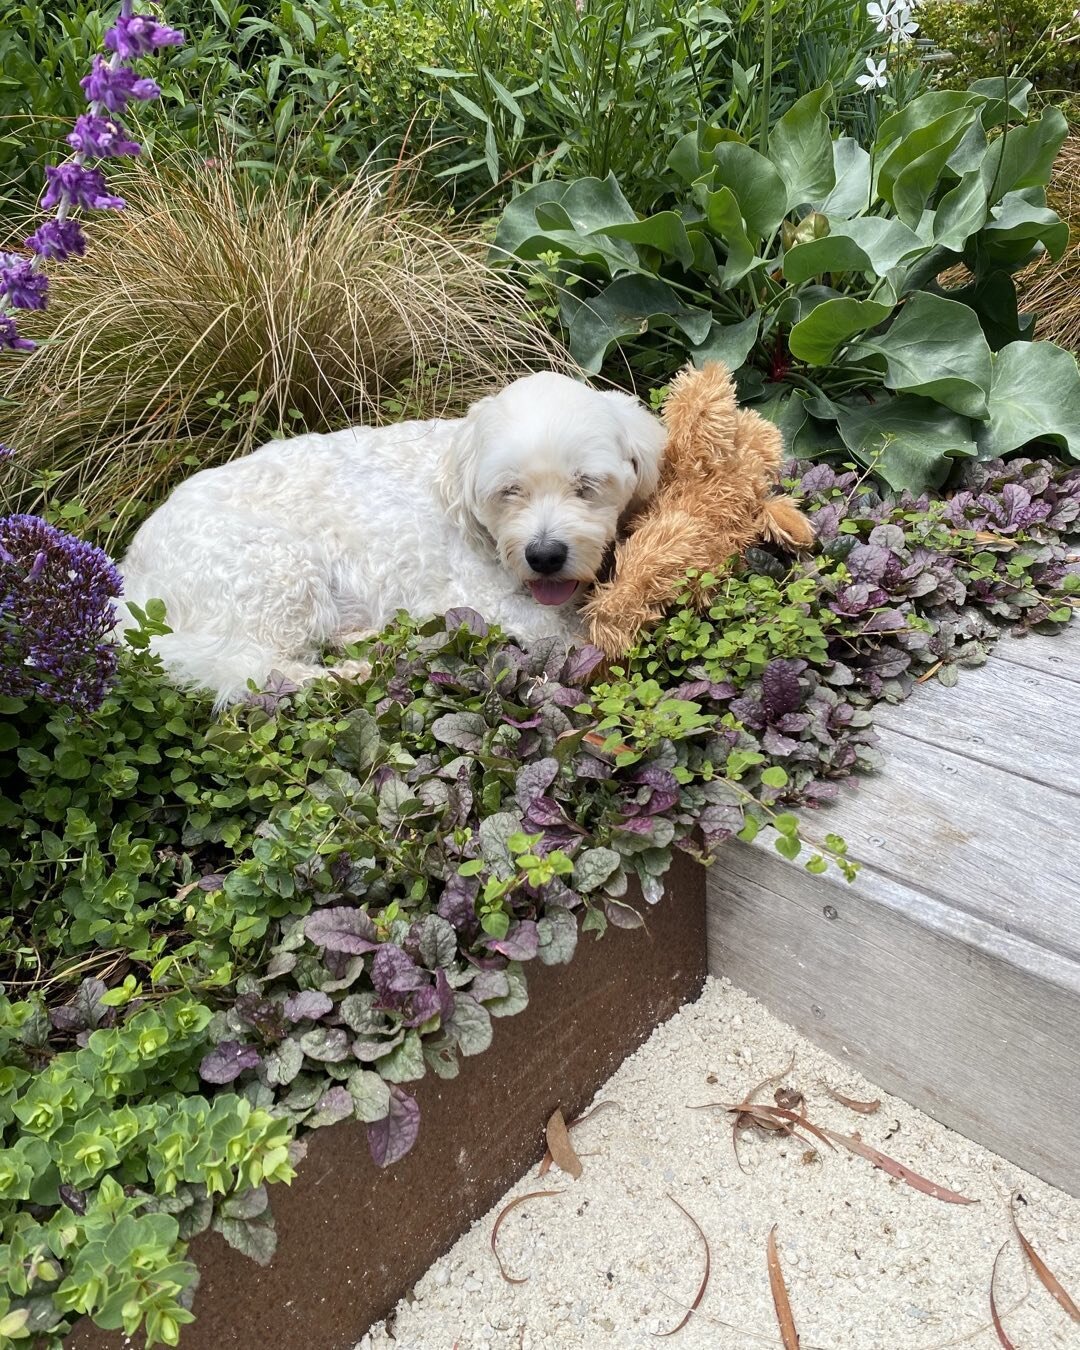 He knows all the best places in my garden🥰